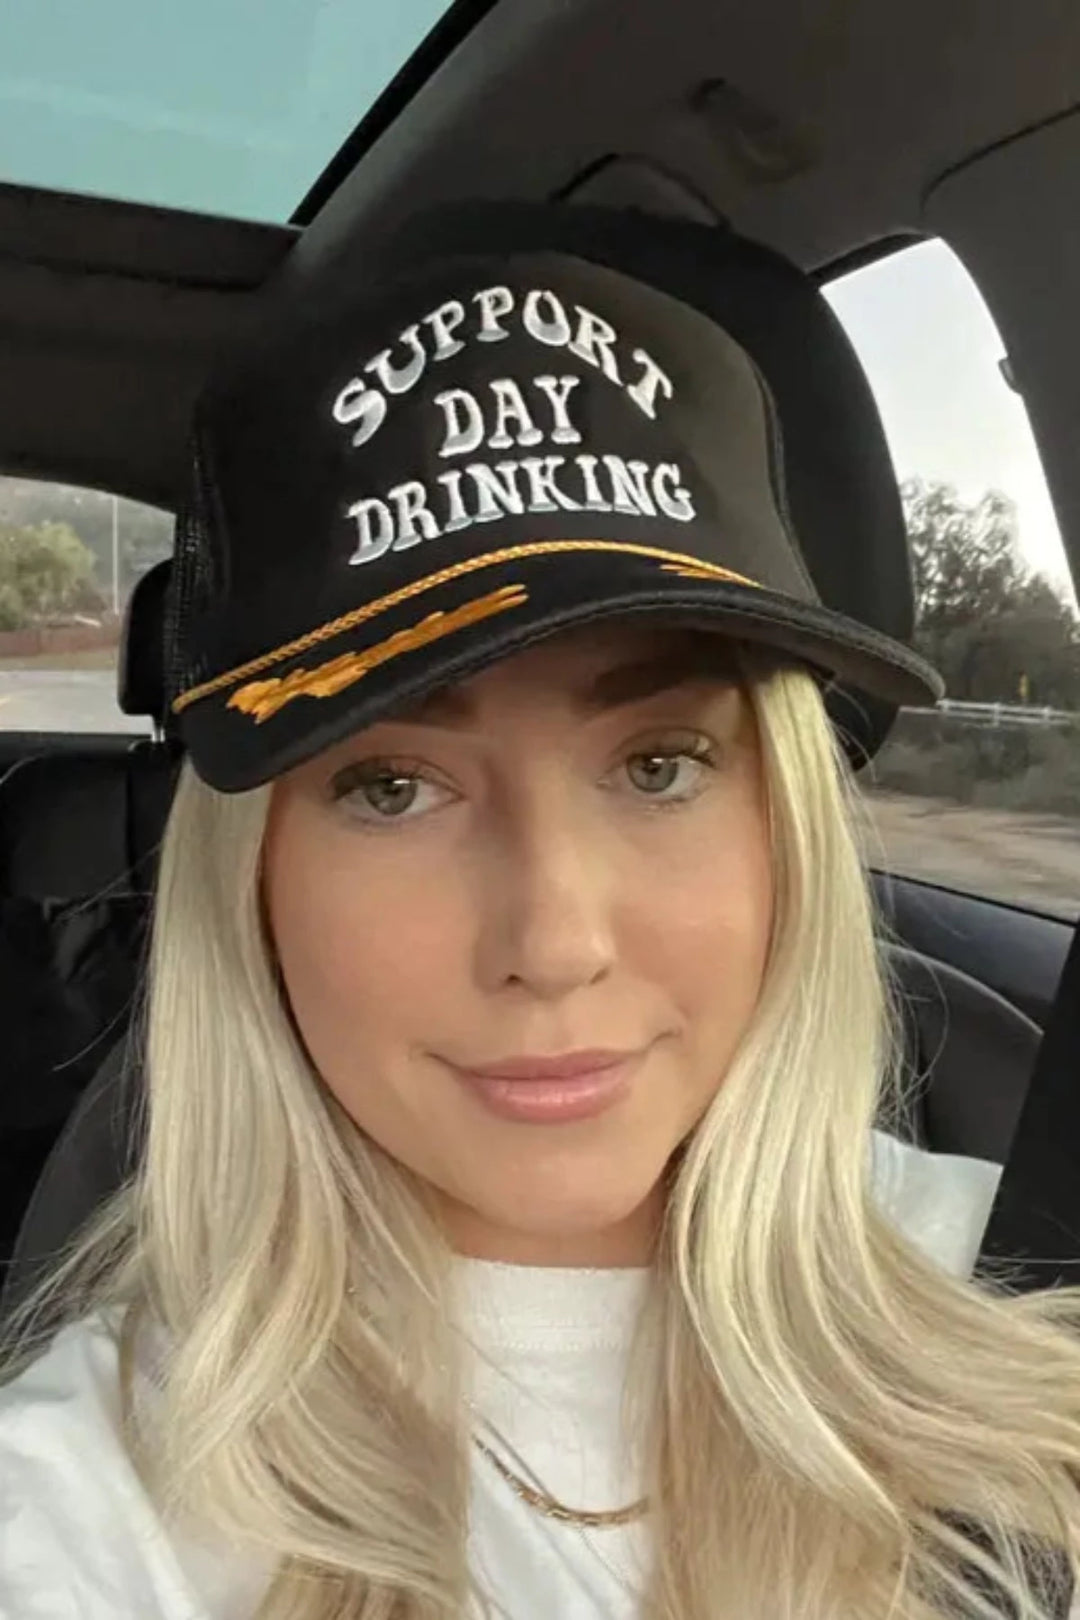 SUPPORT DAY DRINKING TRUCKER HAT - EMBROIDERED